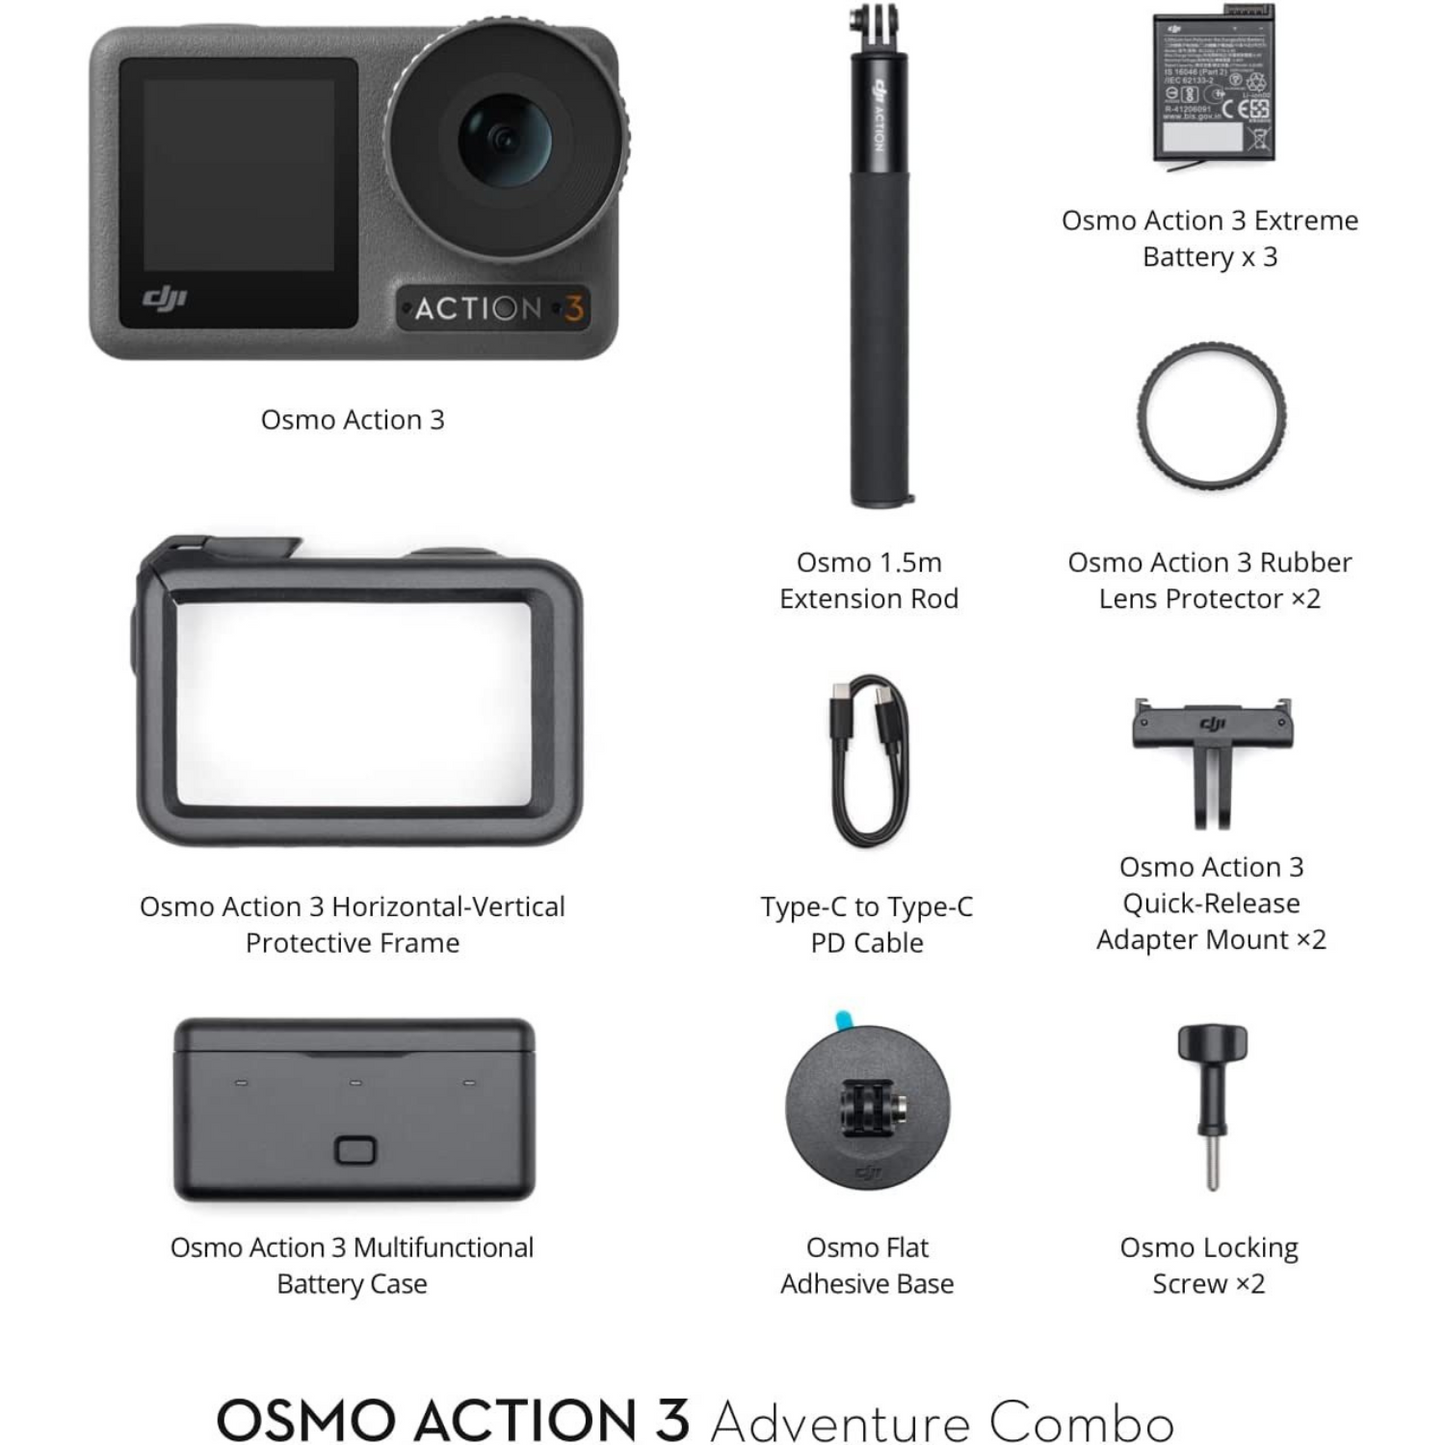 Dji Osmo Action 3 Adventure Combo, Action Camera